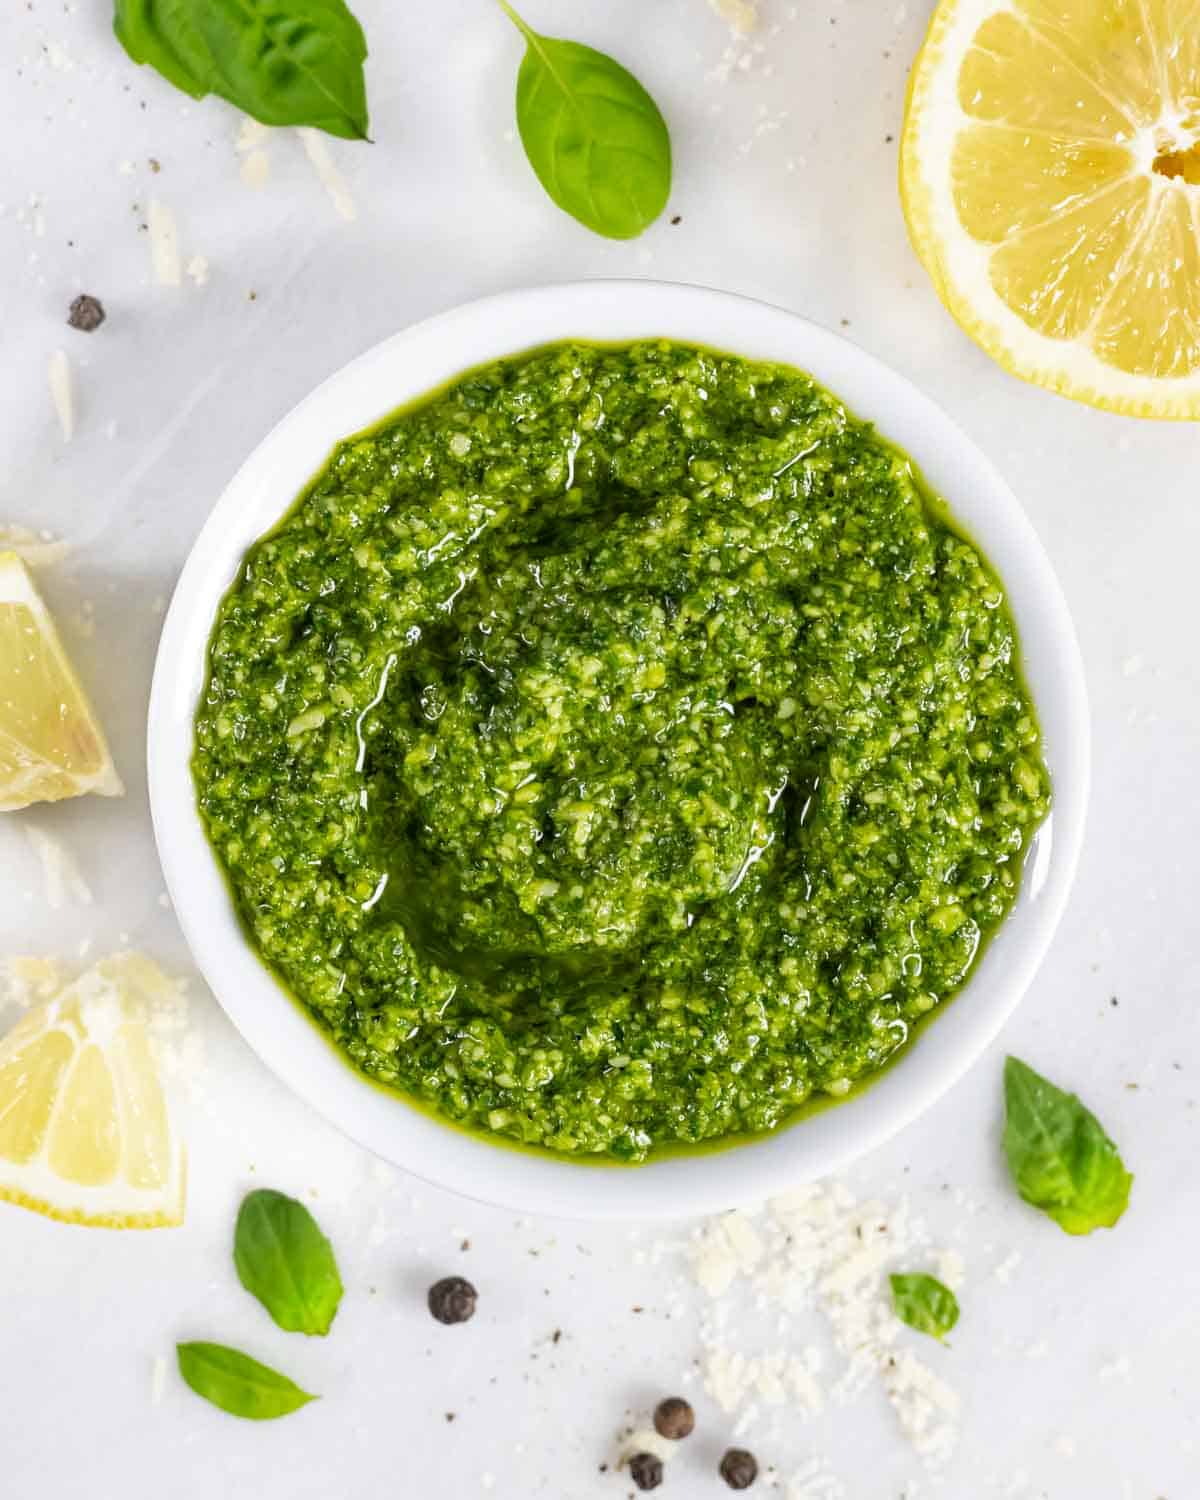 Pesto without pine nuts in a ramekin on a white board with lemon slices, basil leaves and peppercorns.